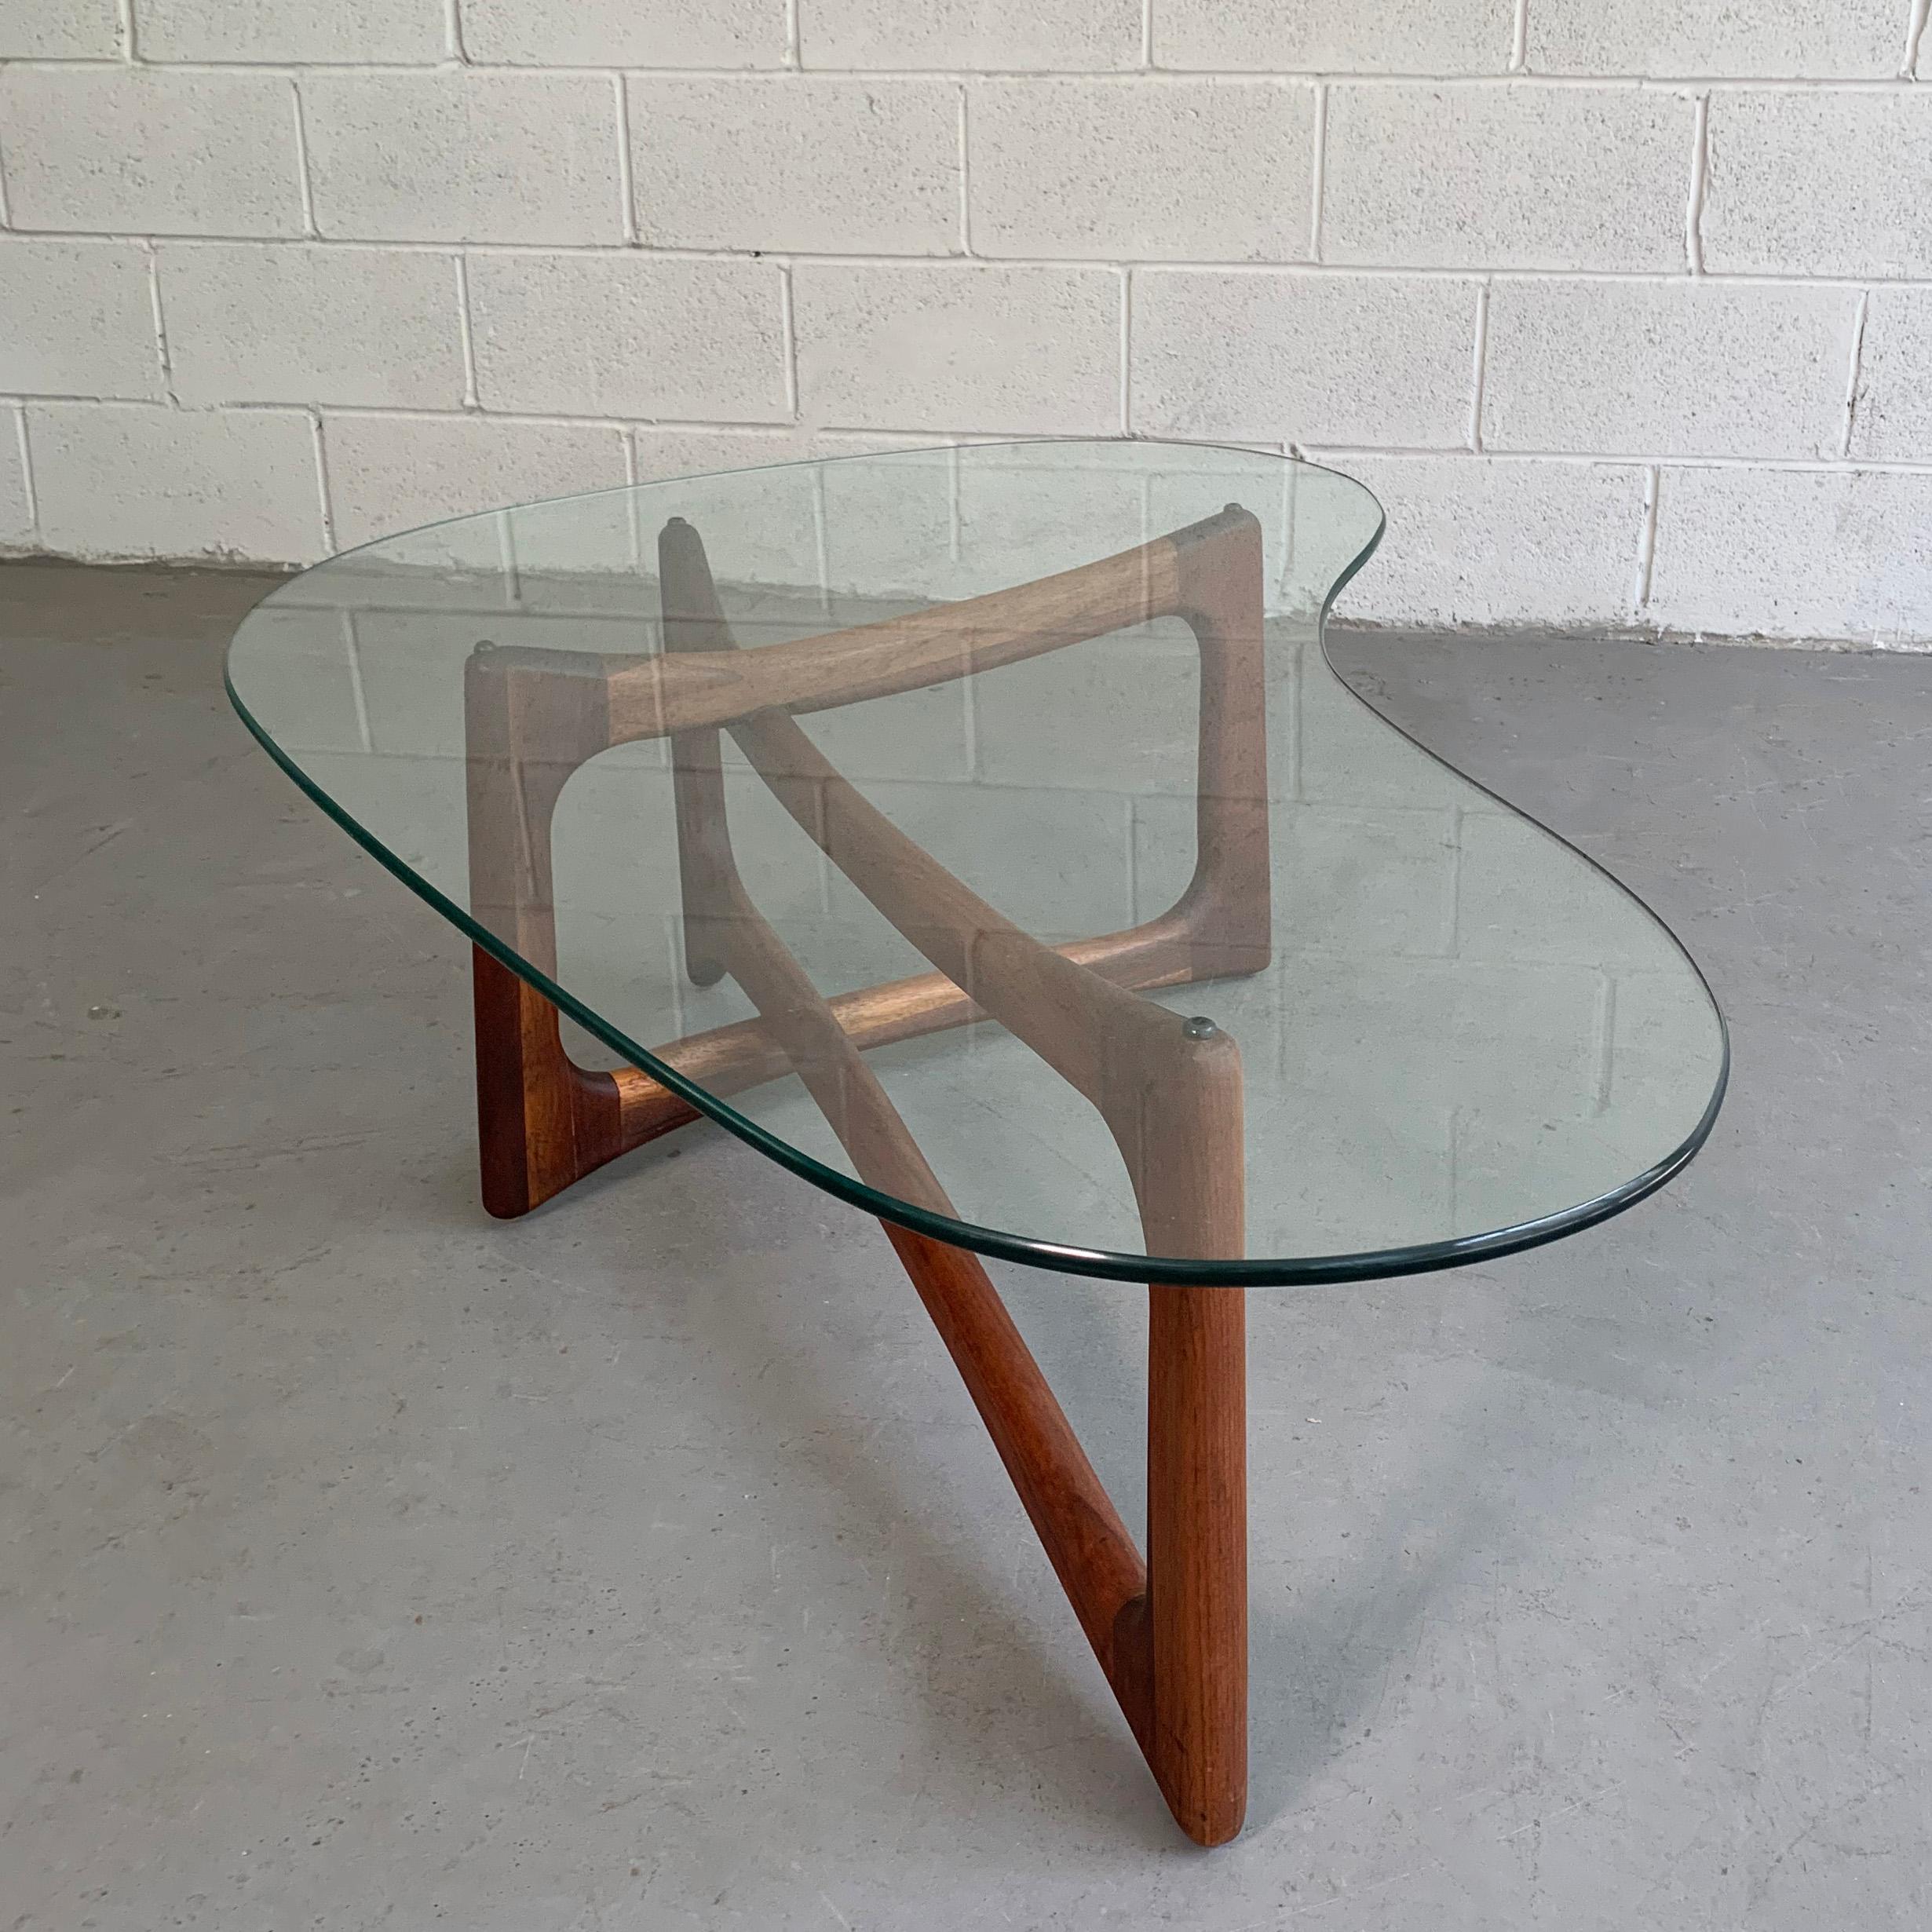 Mid-Century Modern, biomorphic coffee table by Adrian Pearsall for Crafts Associates features a sculptural 